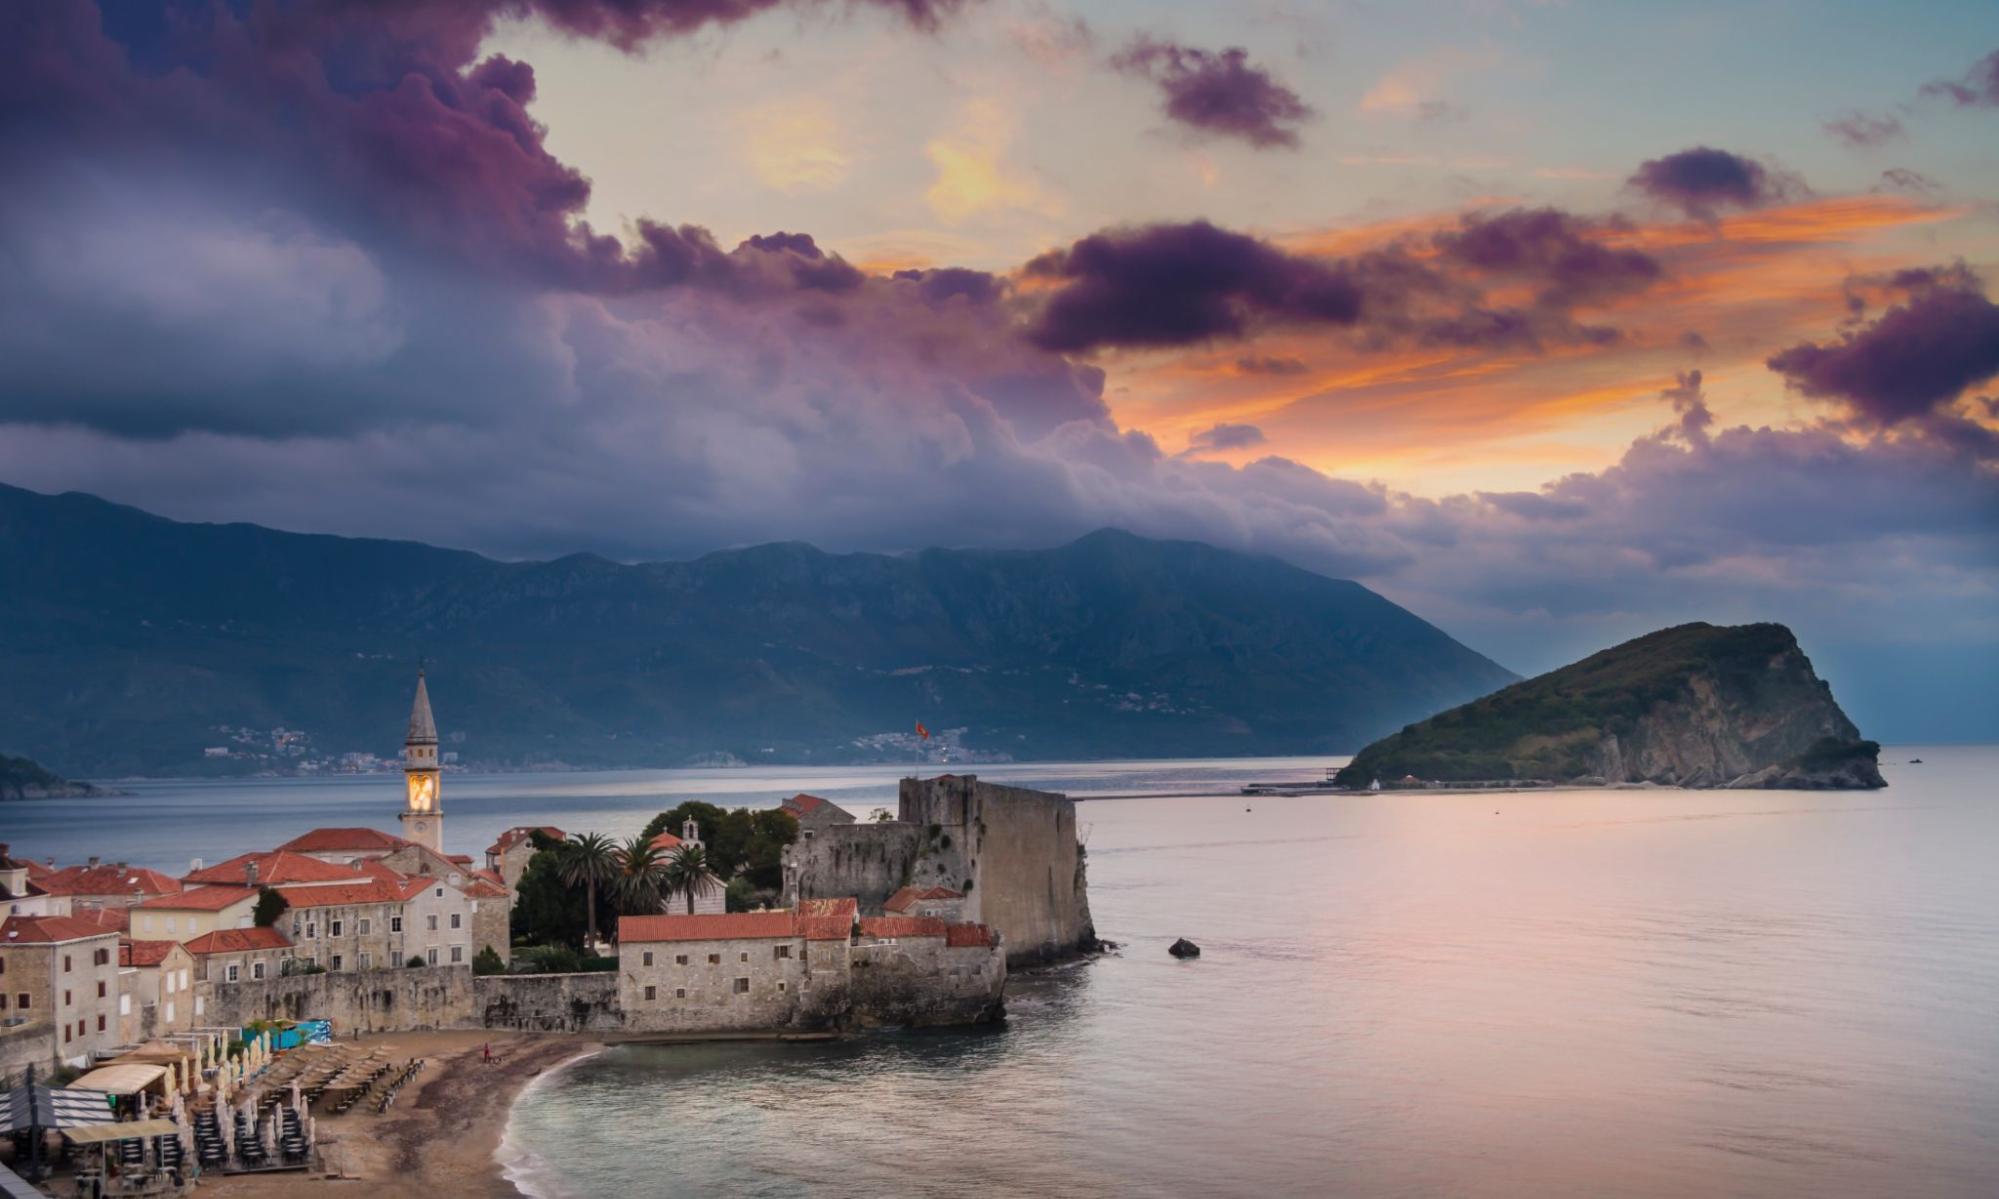 Montenegro offers diverse landscapes and rich cultural heritage